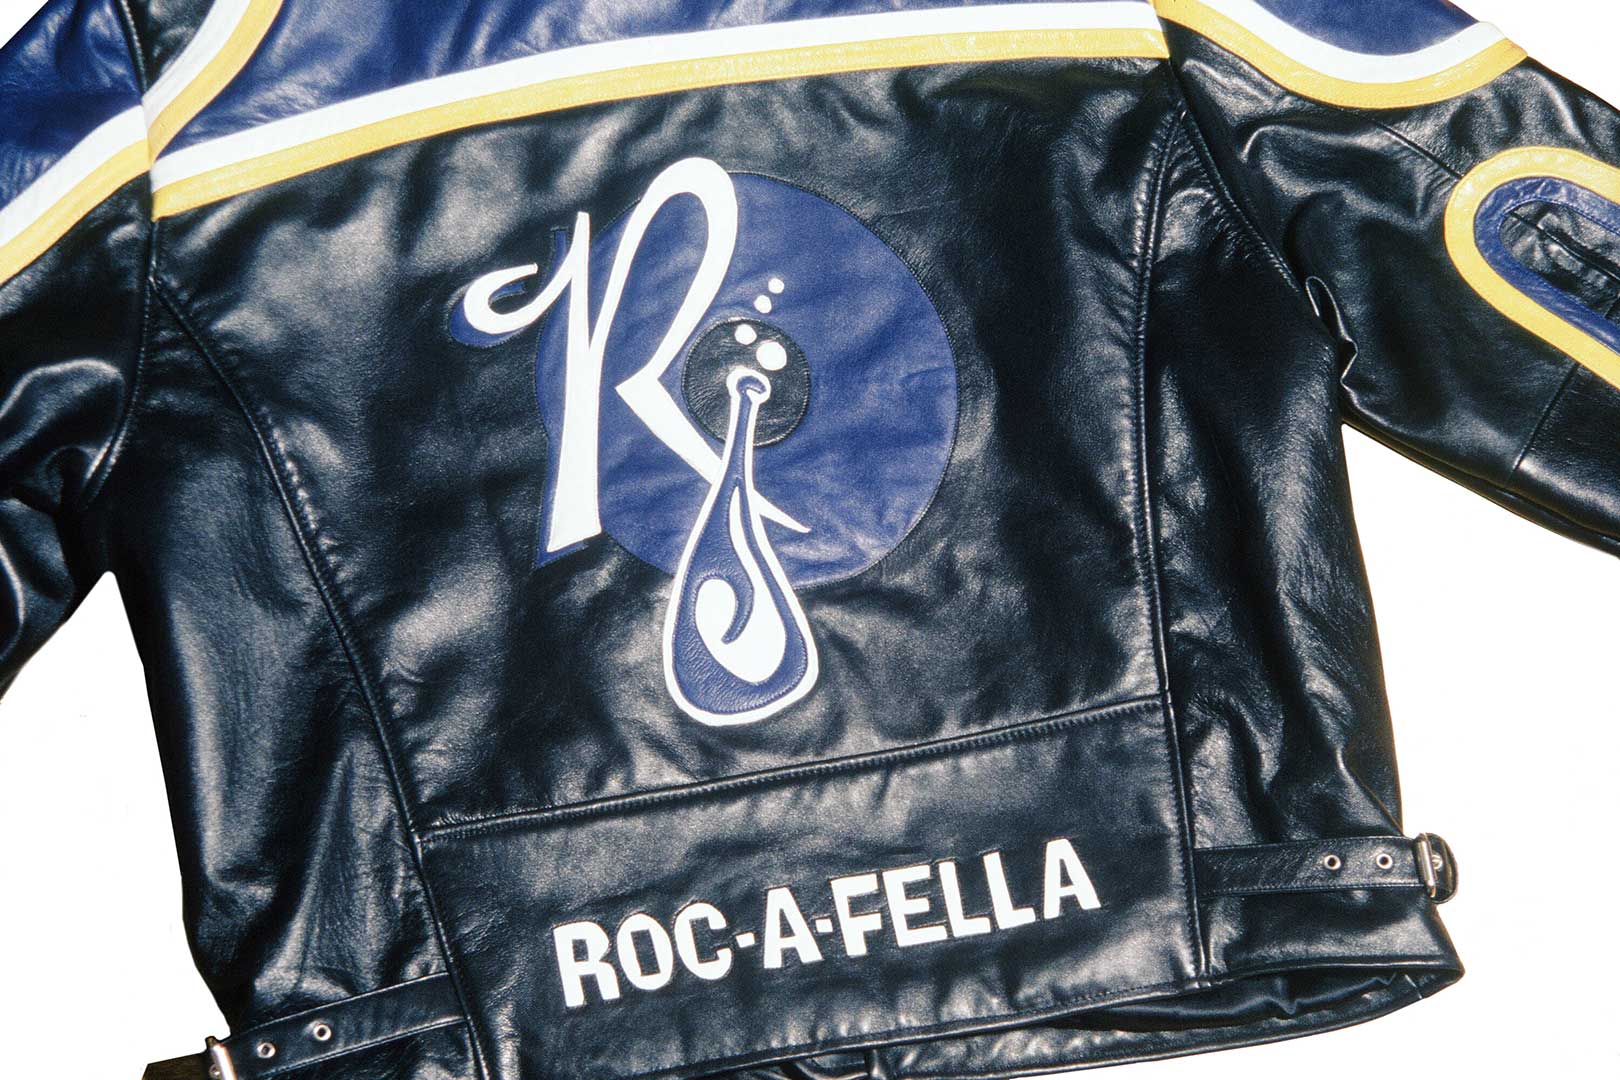 Custom made leather jacket for Roc-a-Fella Records